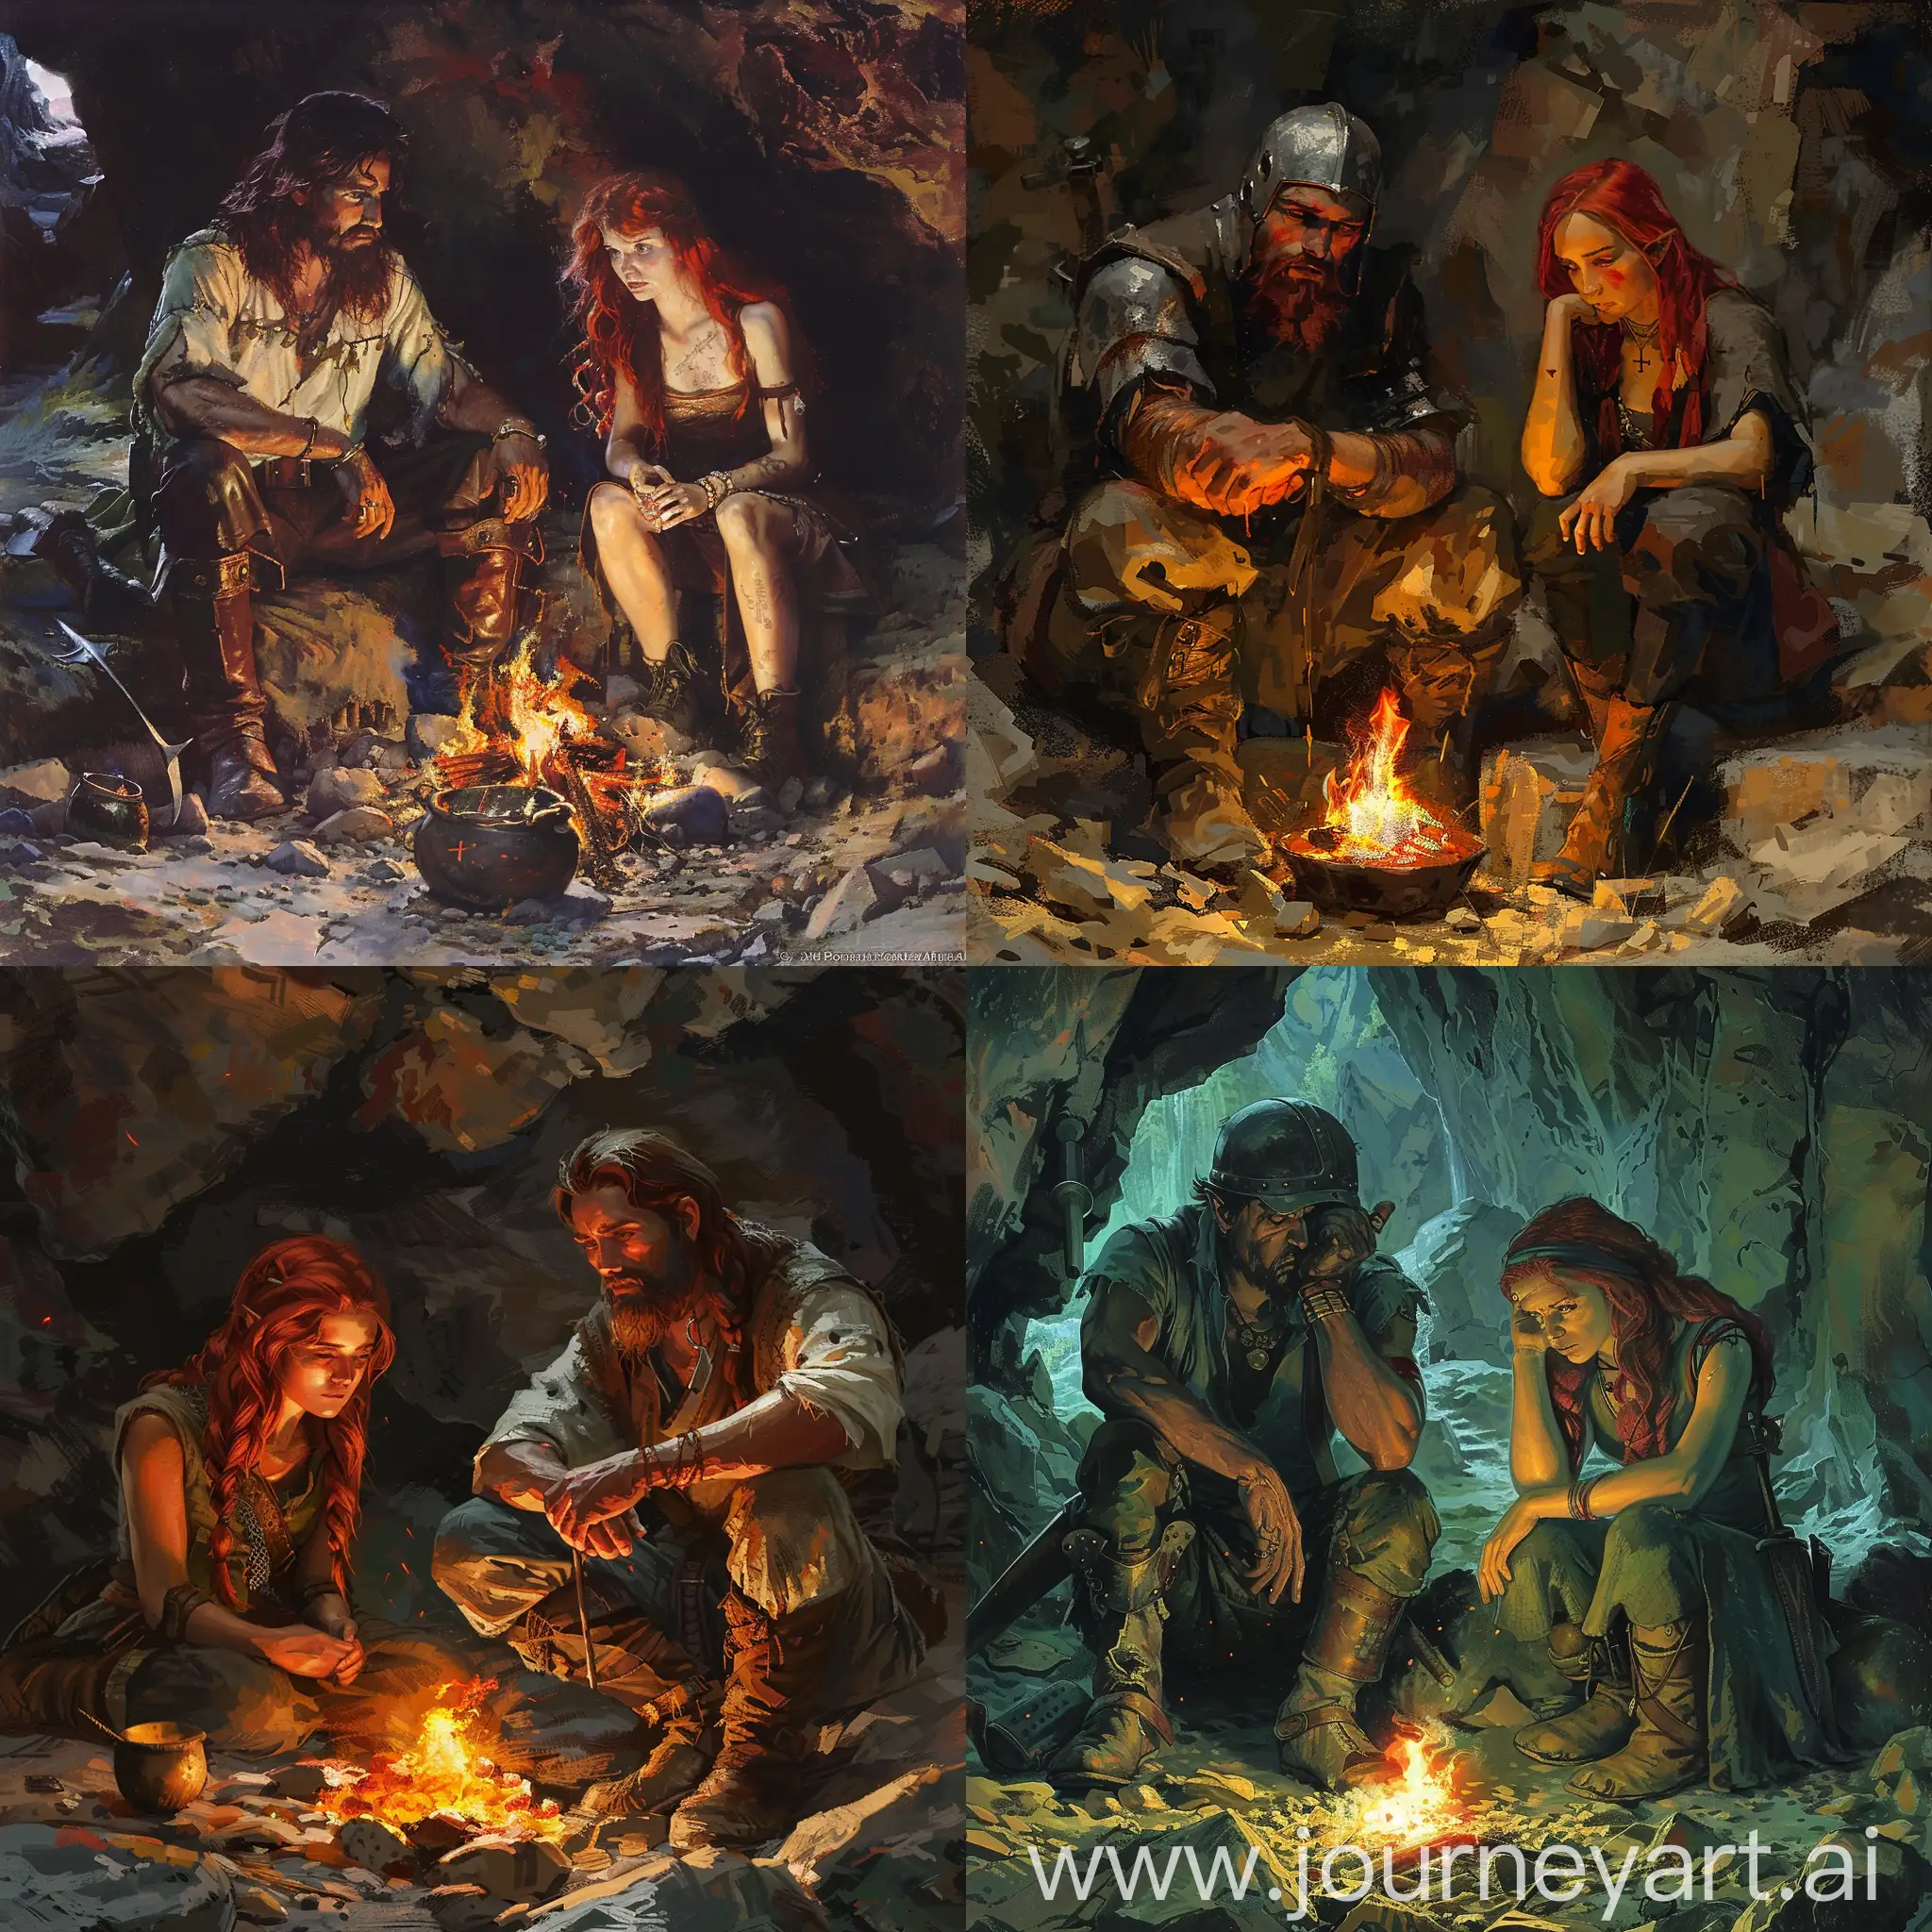 Metalworker-and-RedHaired-Girl-Sitting-by-Cave-Fire